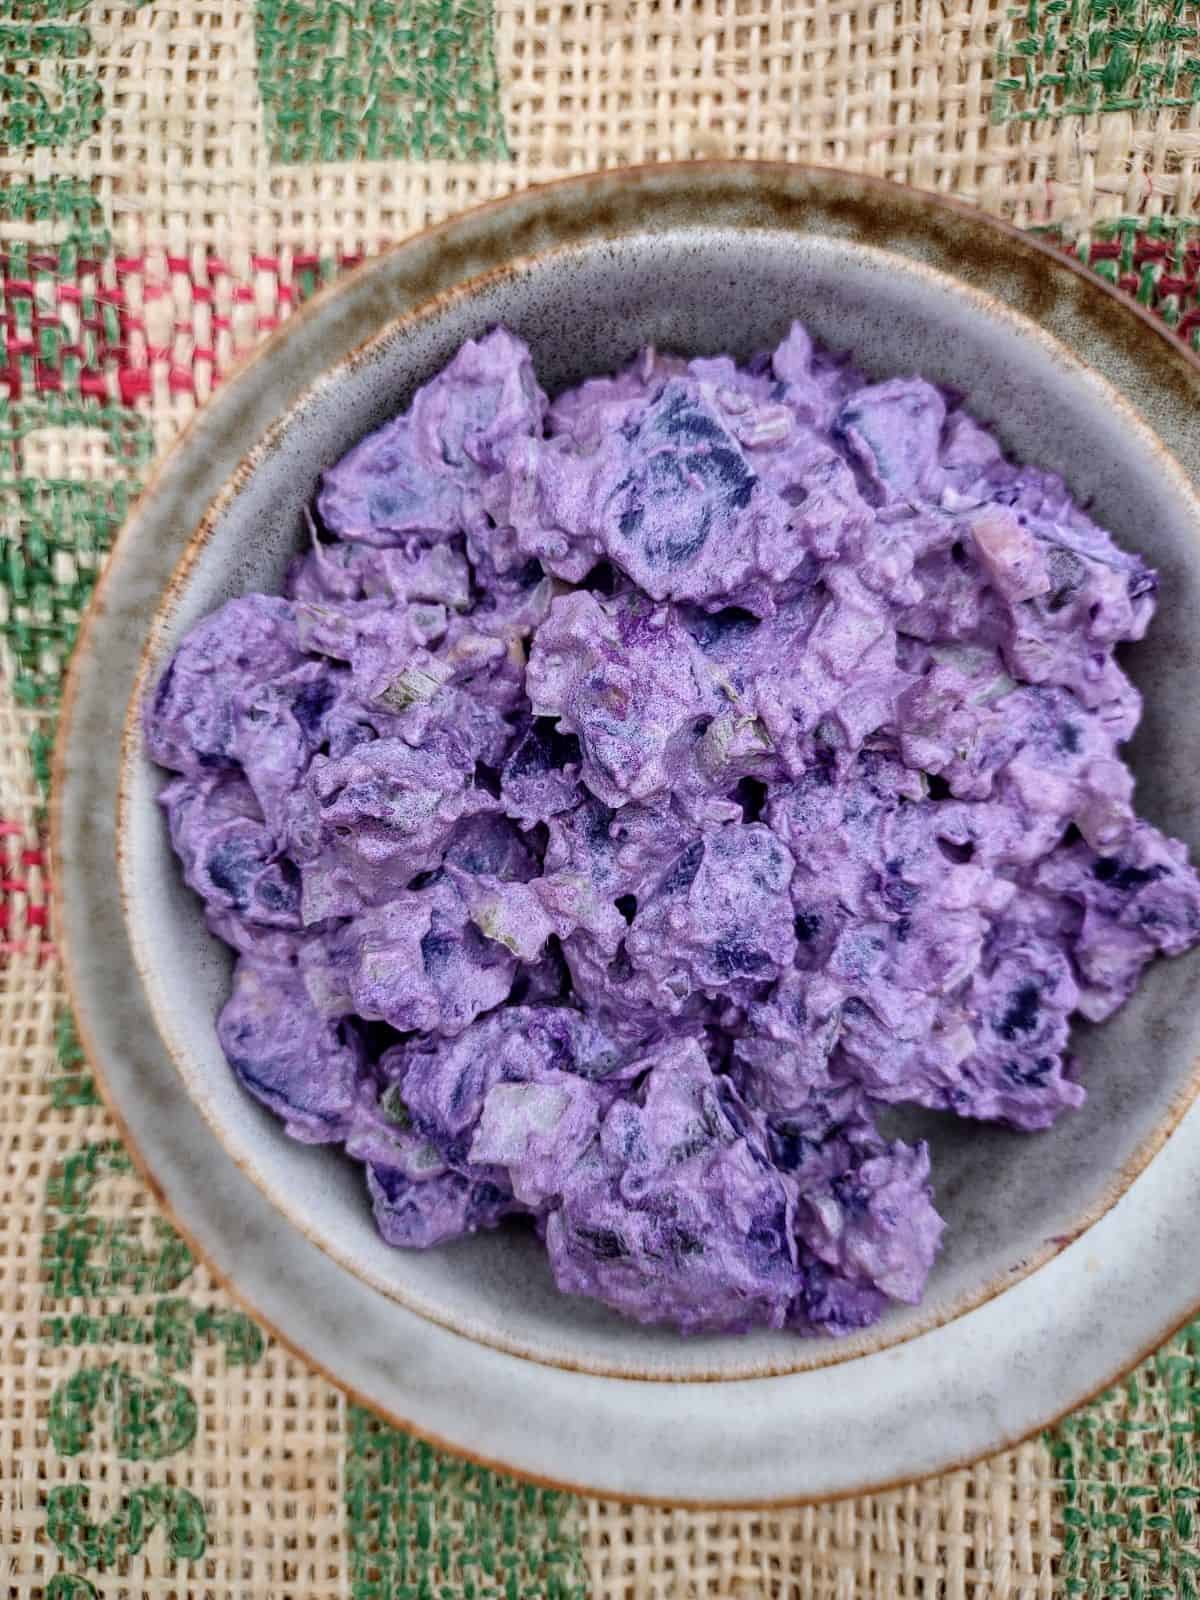 Purple potato salad in a bowl on top of a plate of the same color.